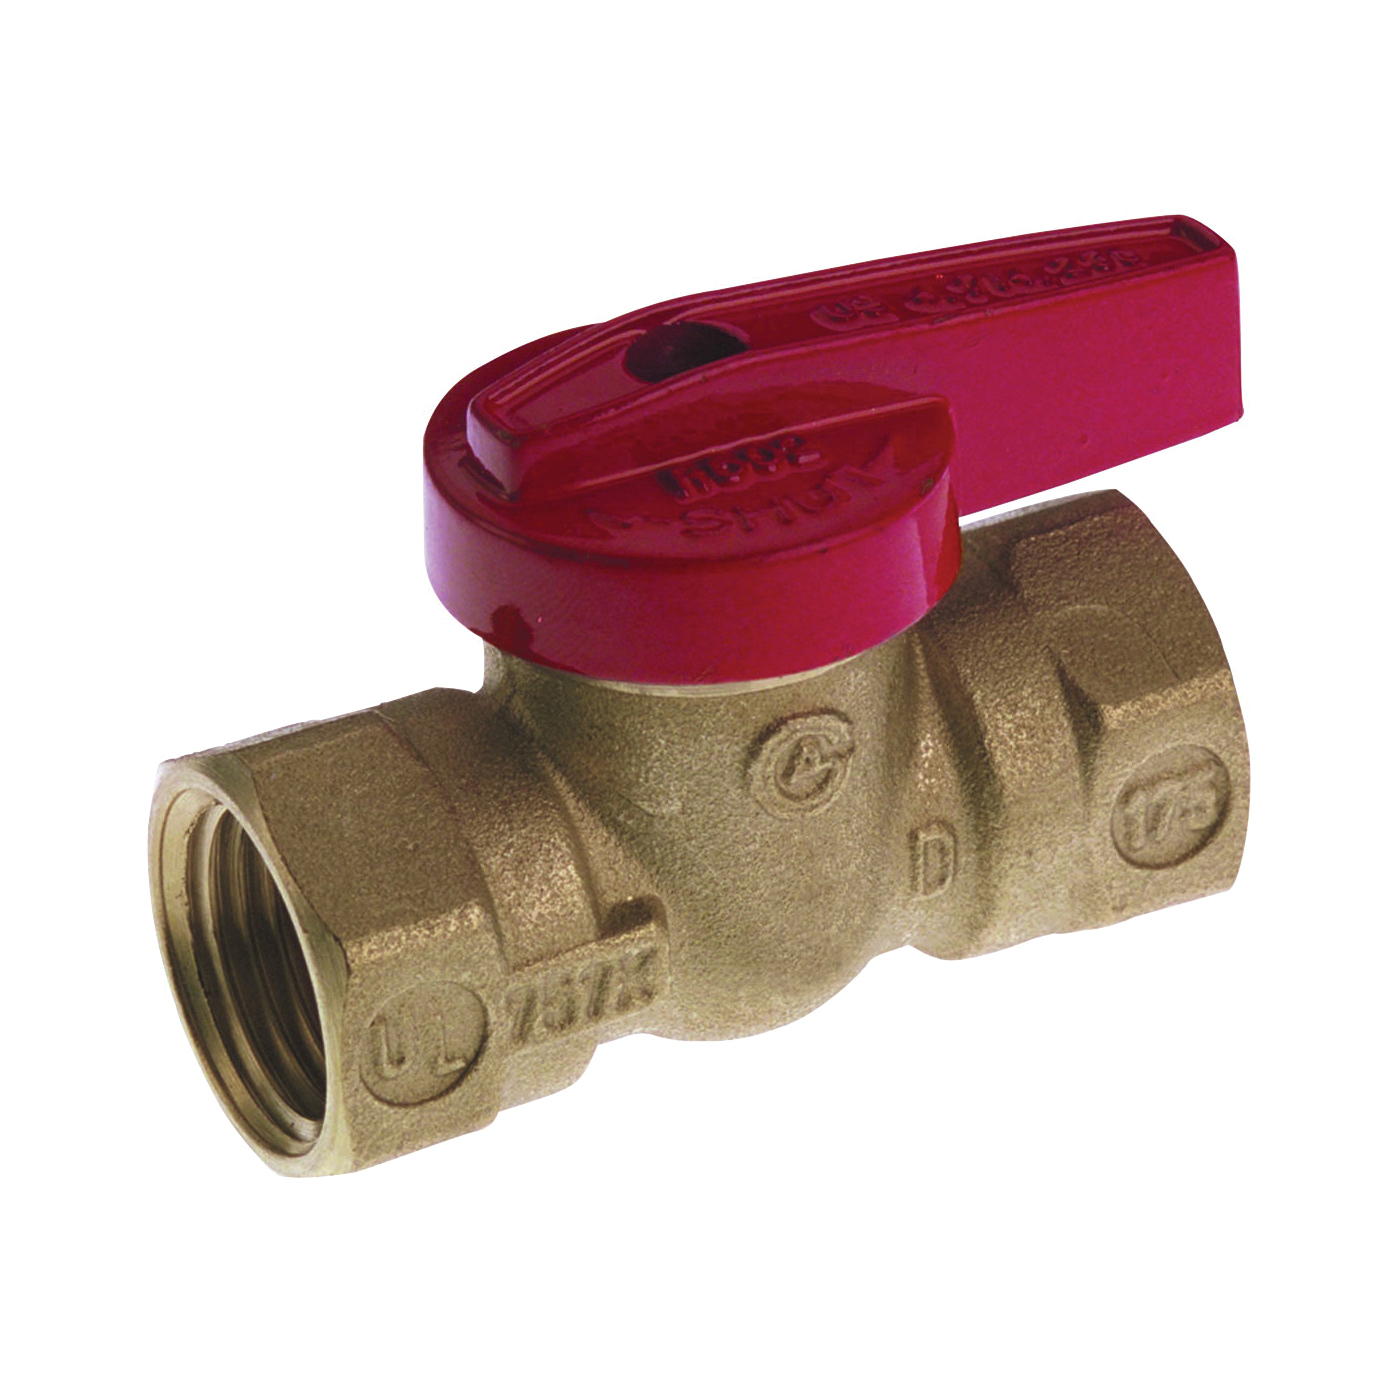 ProLine Series 110-522HC Gas Ball Valve, 3/8 in Connection, FPT, 200 psi Pressure, Manual Actuator, Brass Body